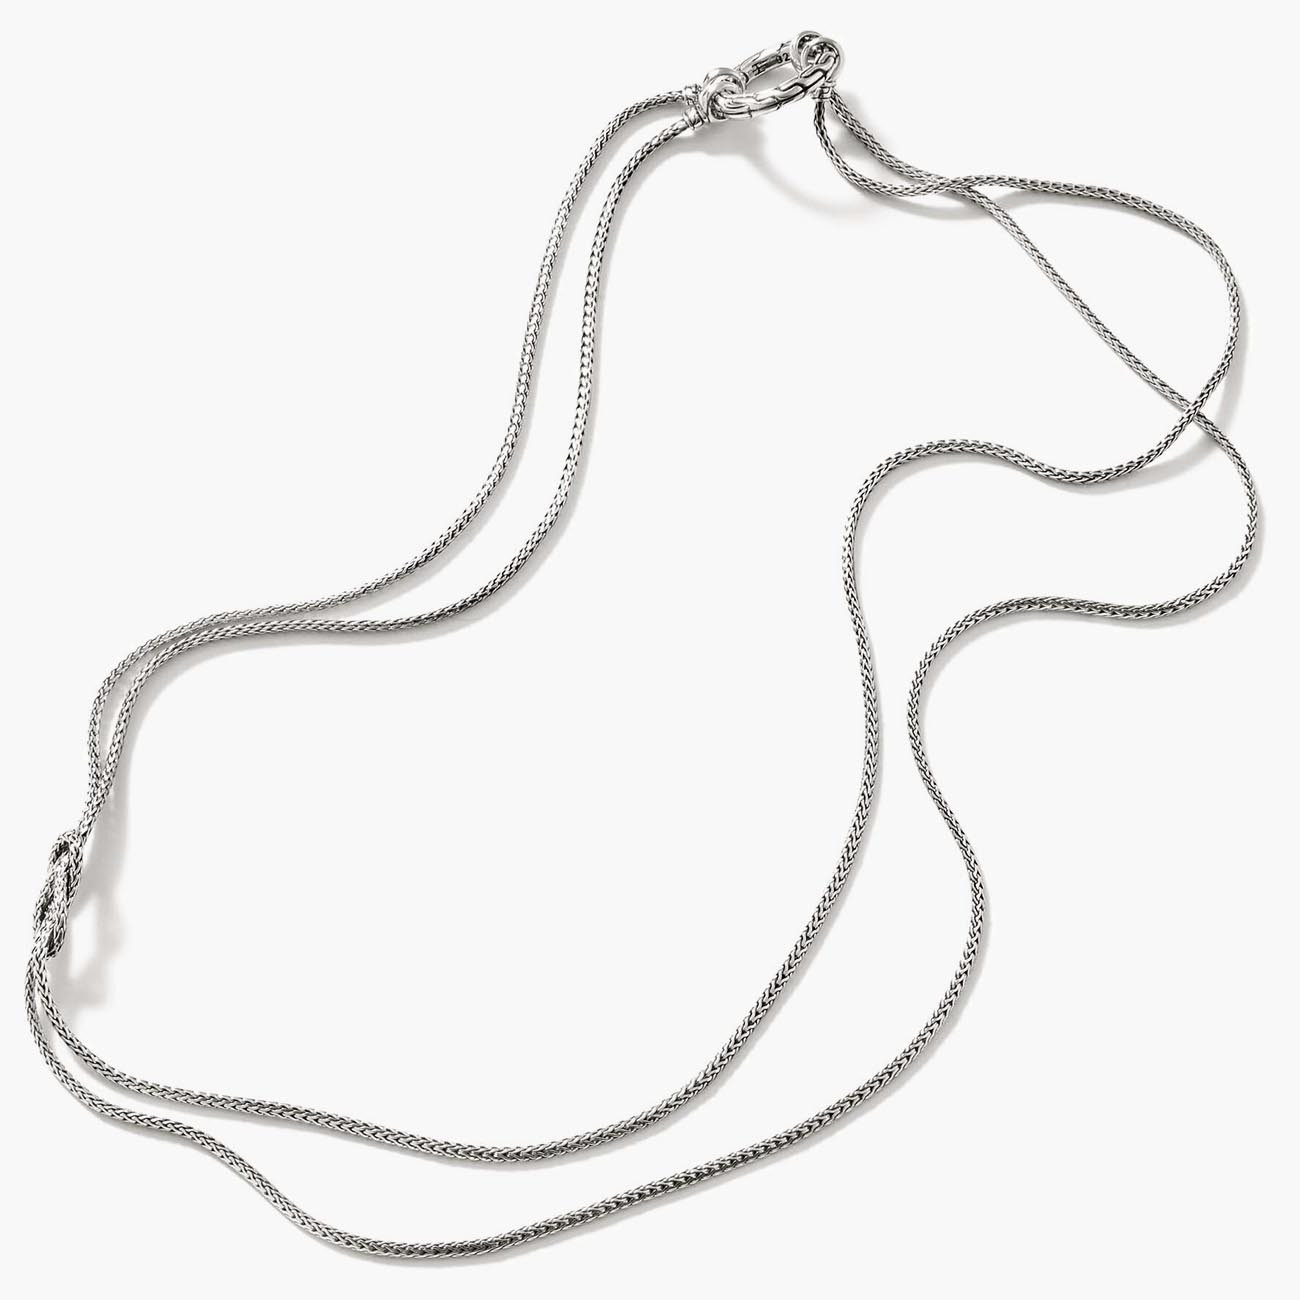 John Hardy Classic Chain Silver Manah Chain Necklace, NB900908X18-24